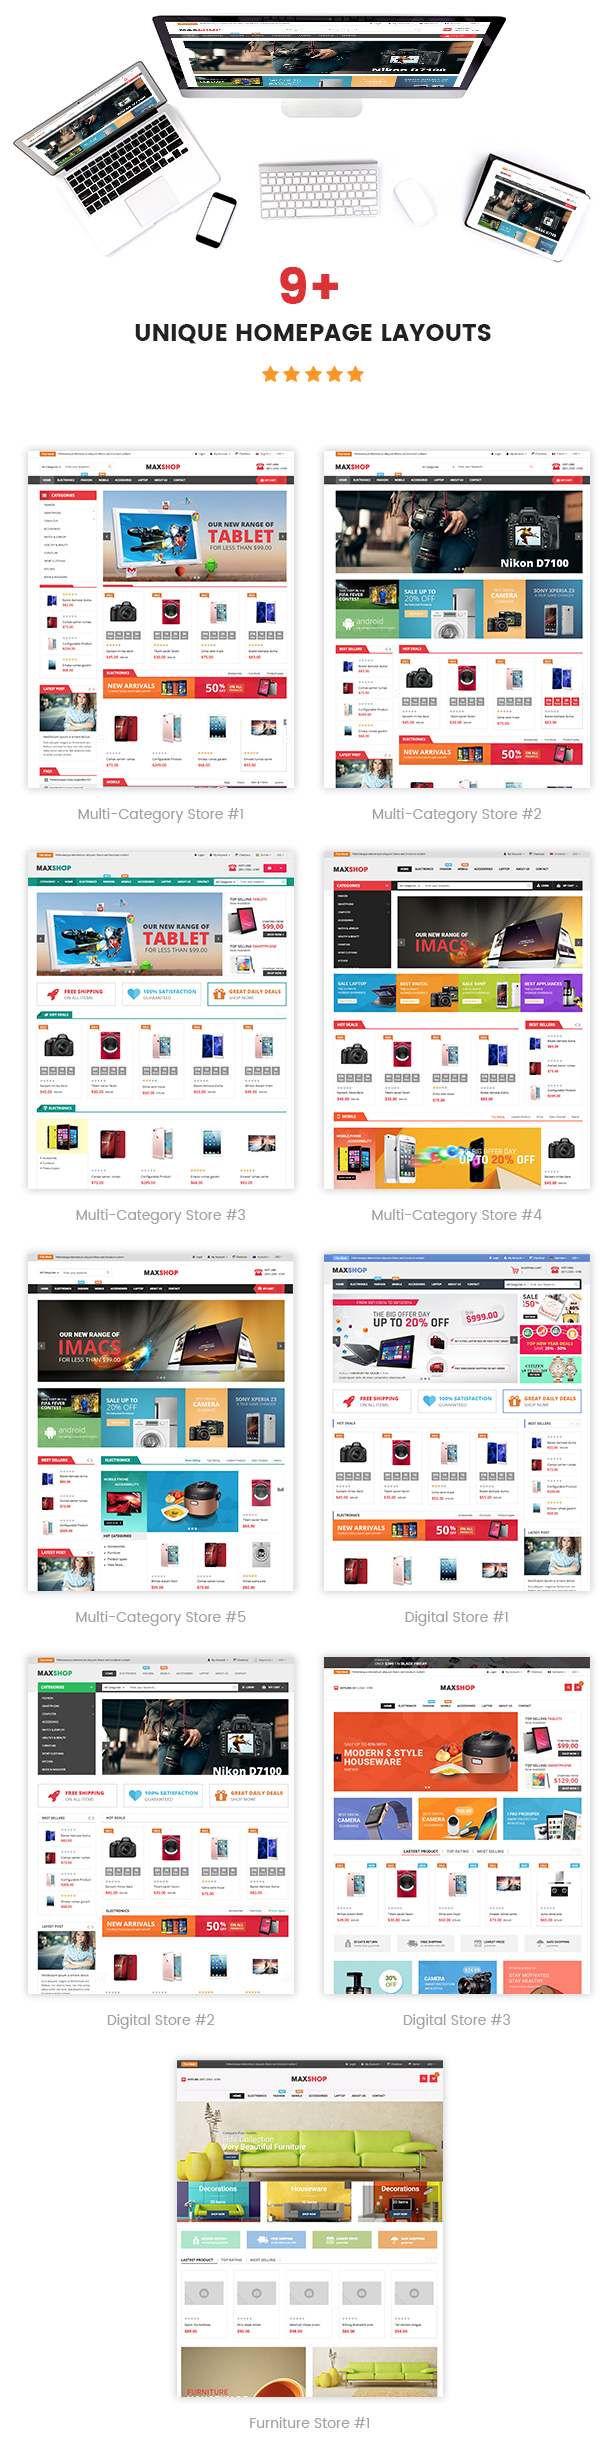 3.3.homepage styles - MaxShop - Electronics Store Elementor WooCommerce WordPress Theme (9+ Homepages, 2+ Mobile Layouts)